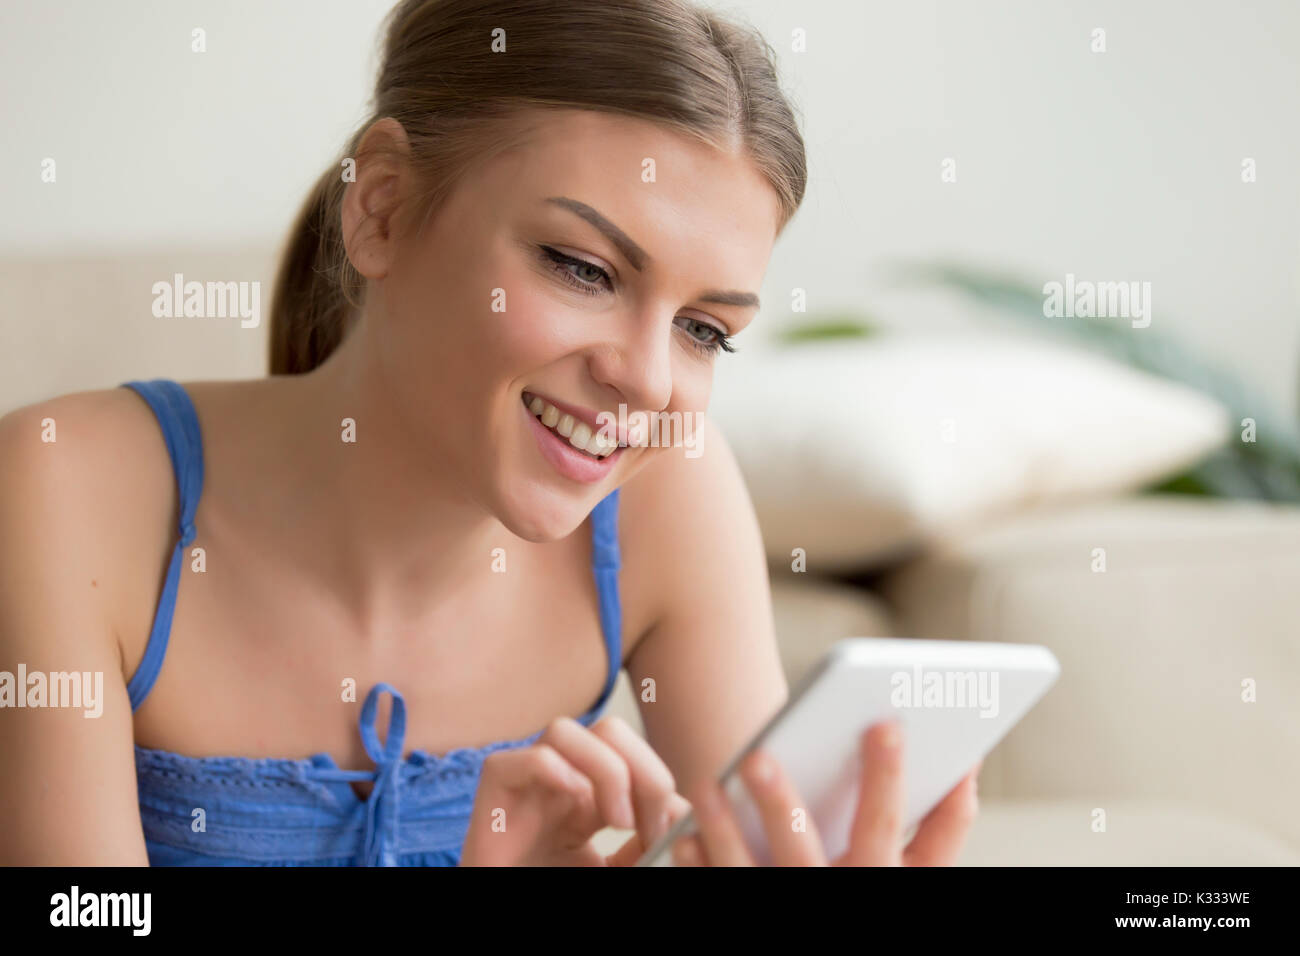 Portrait of cute young woman using digital tablet Stock Photo